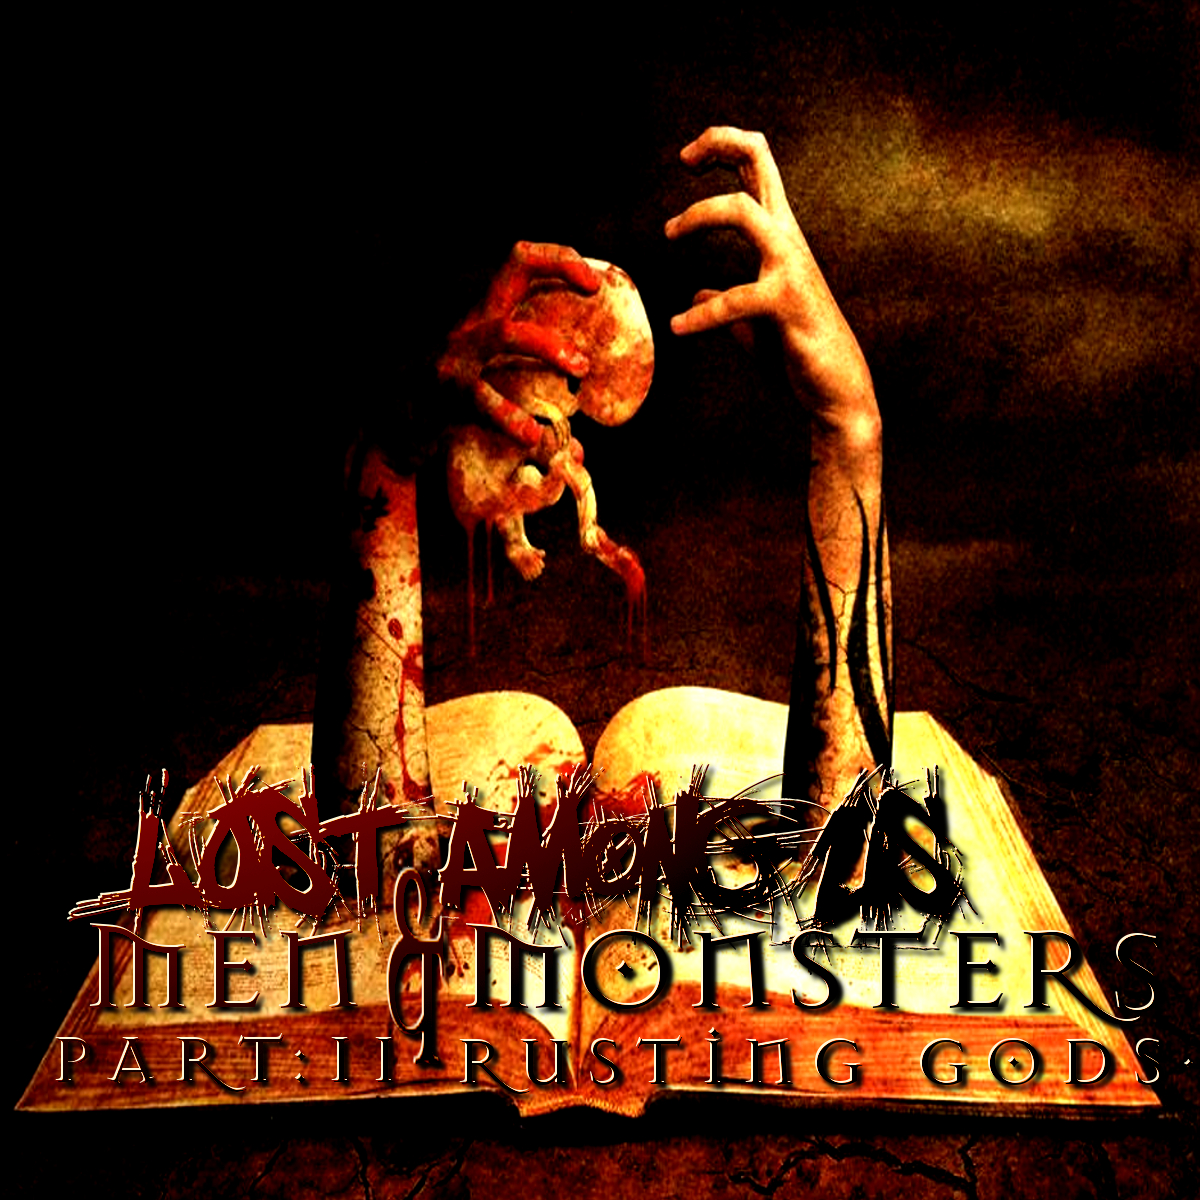 News Added Apr 16, 2013 Men&Monsters Part: II (Rusting Gods) is the sequel to M&MpI Trusting Bonds, and is the second part to Lost Among Us' three part album Men&Monsters, This album features 15 tracks. Founded January 13, 2008 Release Date January 13th, 2012 Genre Instru-Metal Members Lead Guitarist - Bullets Rhythm Guitarist - Revenge […]